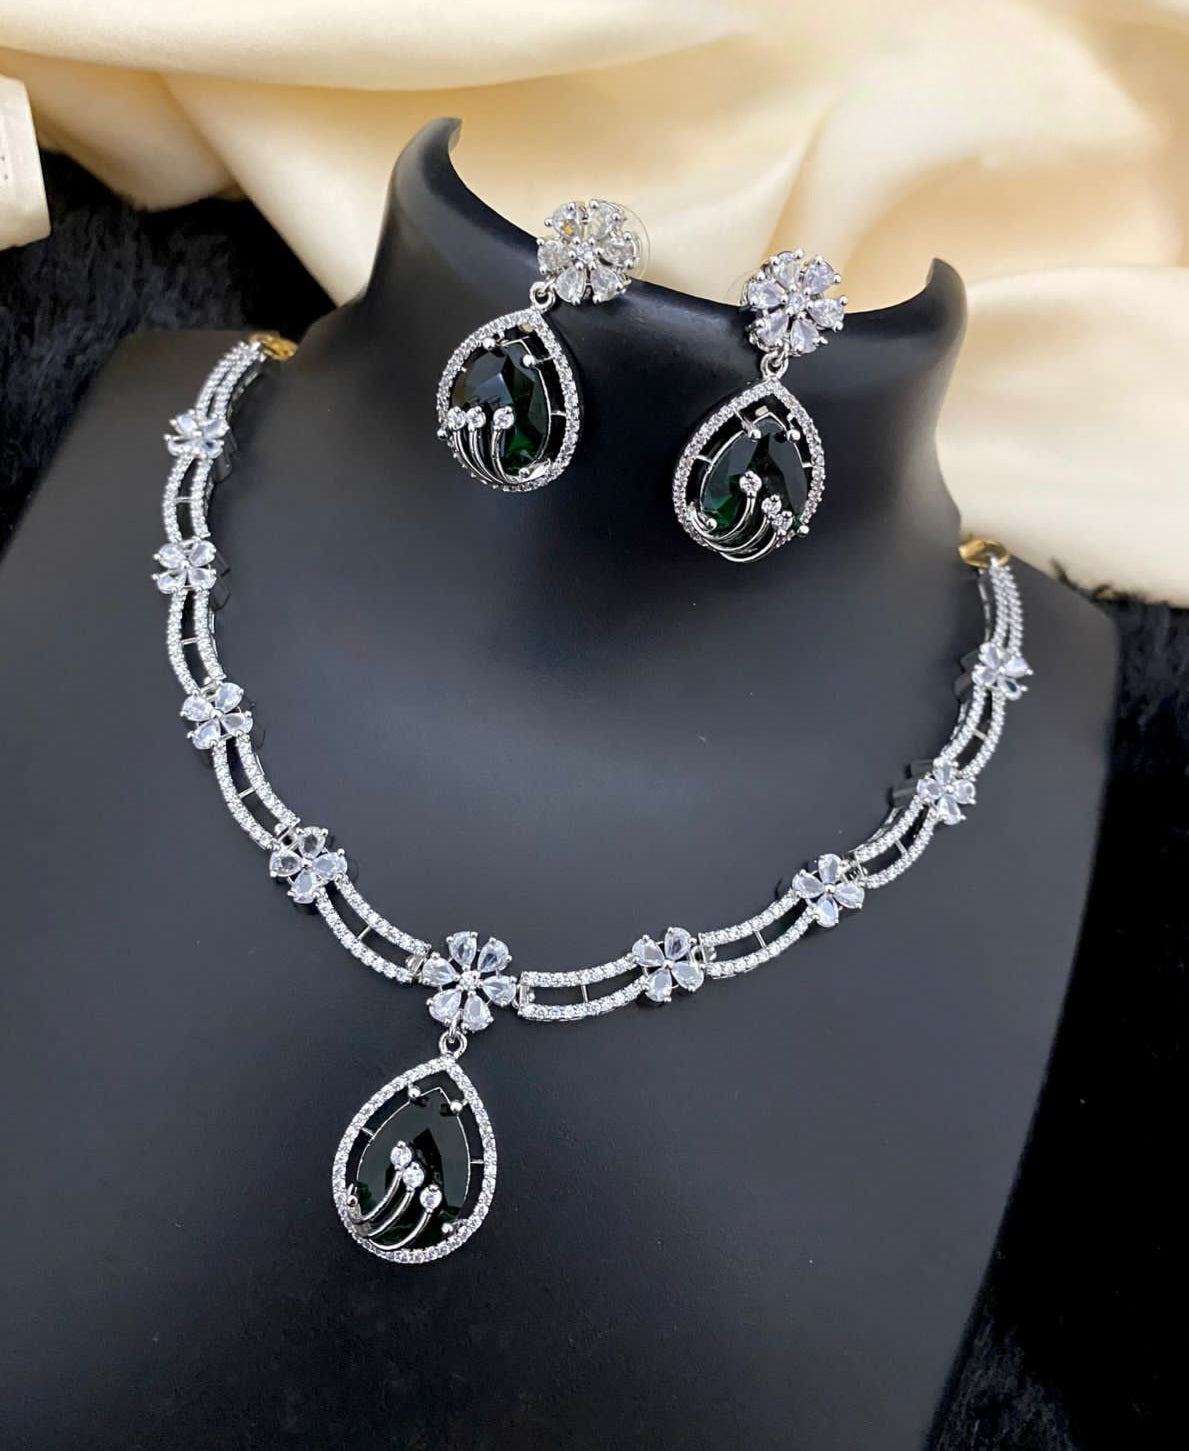 Grand 1 Emerald Necklace and Earrings Set in 14k Gold (May)